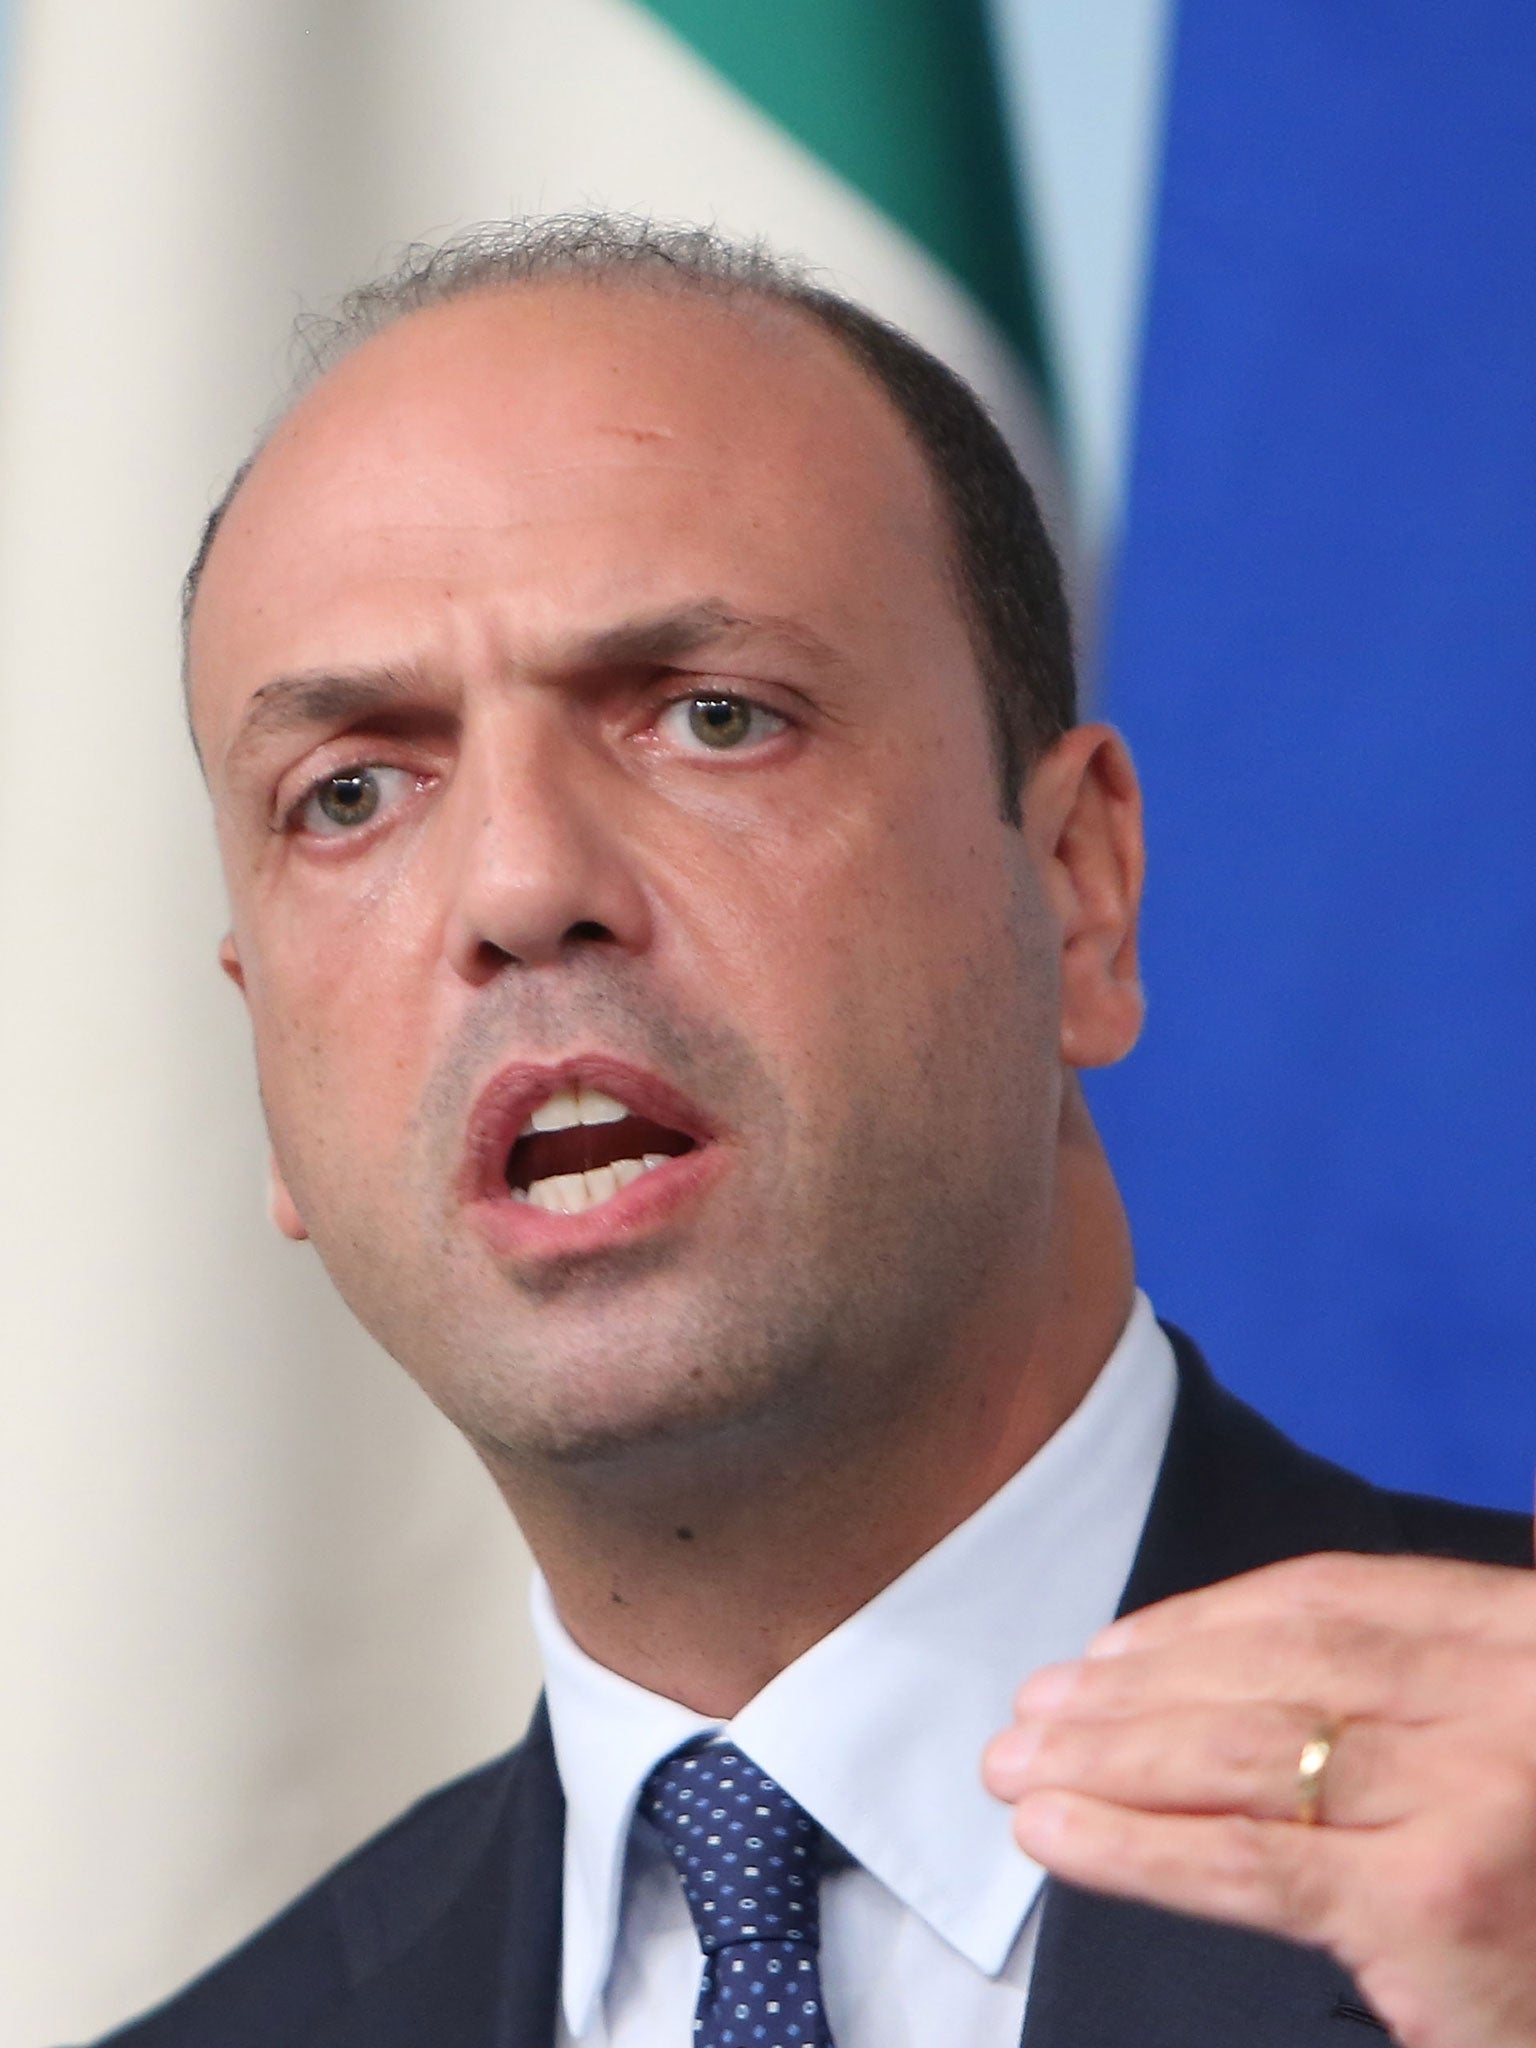 Deputy Prime Minister and Interior Minister Angelino Alfano of the PDL attends a press conference at Palazzo Chigi on October 9, 2013